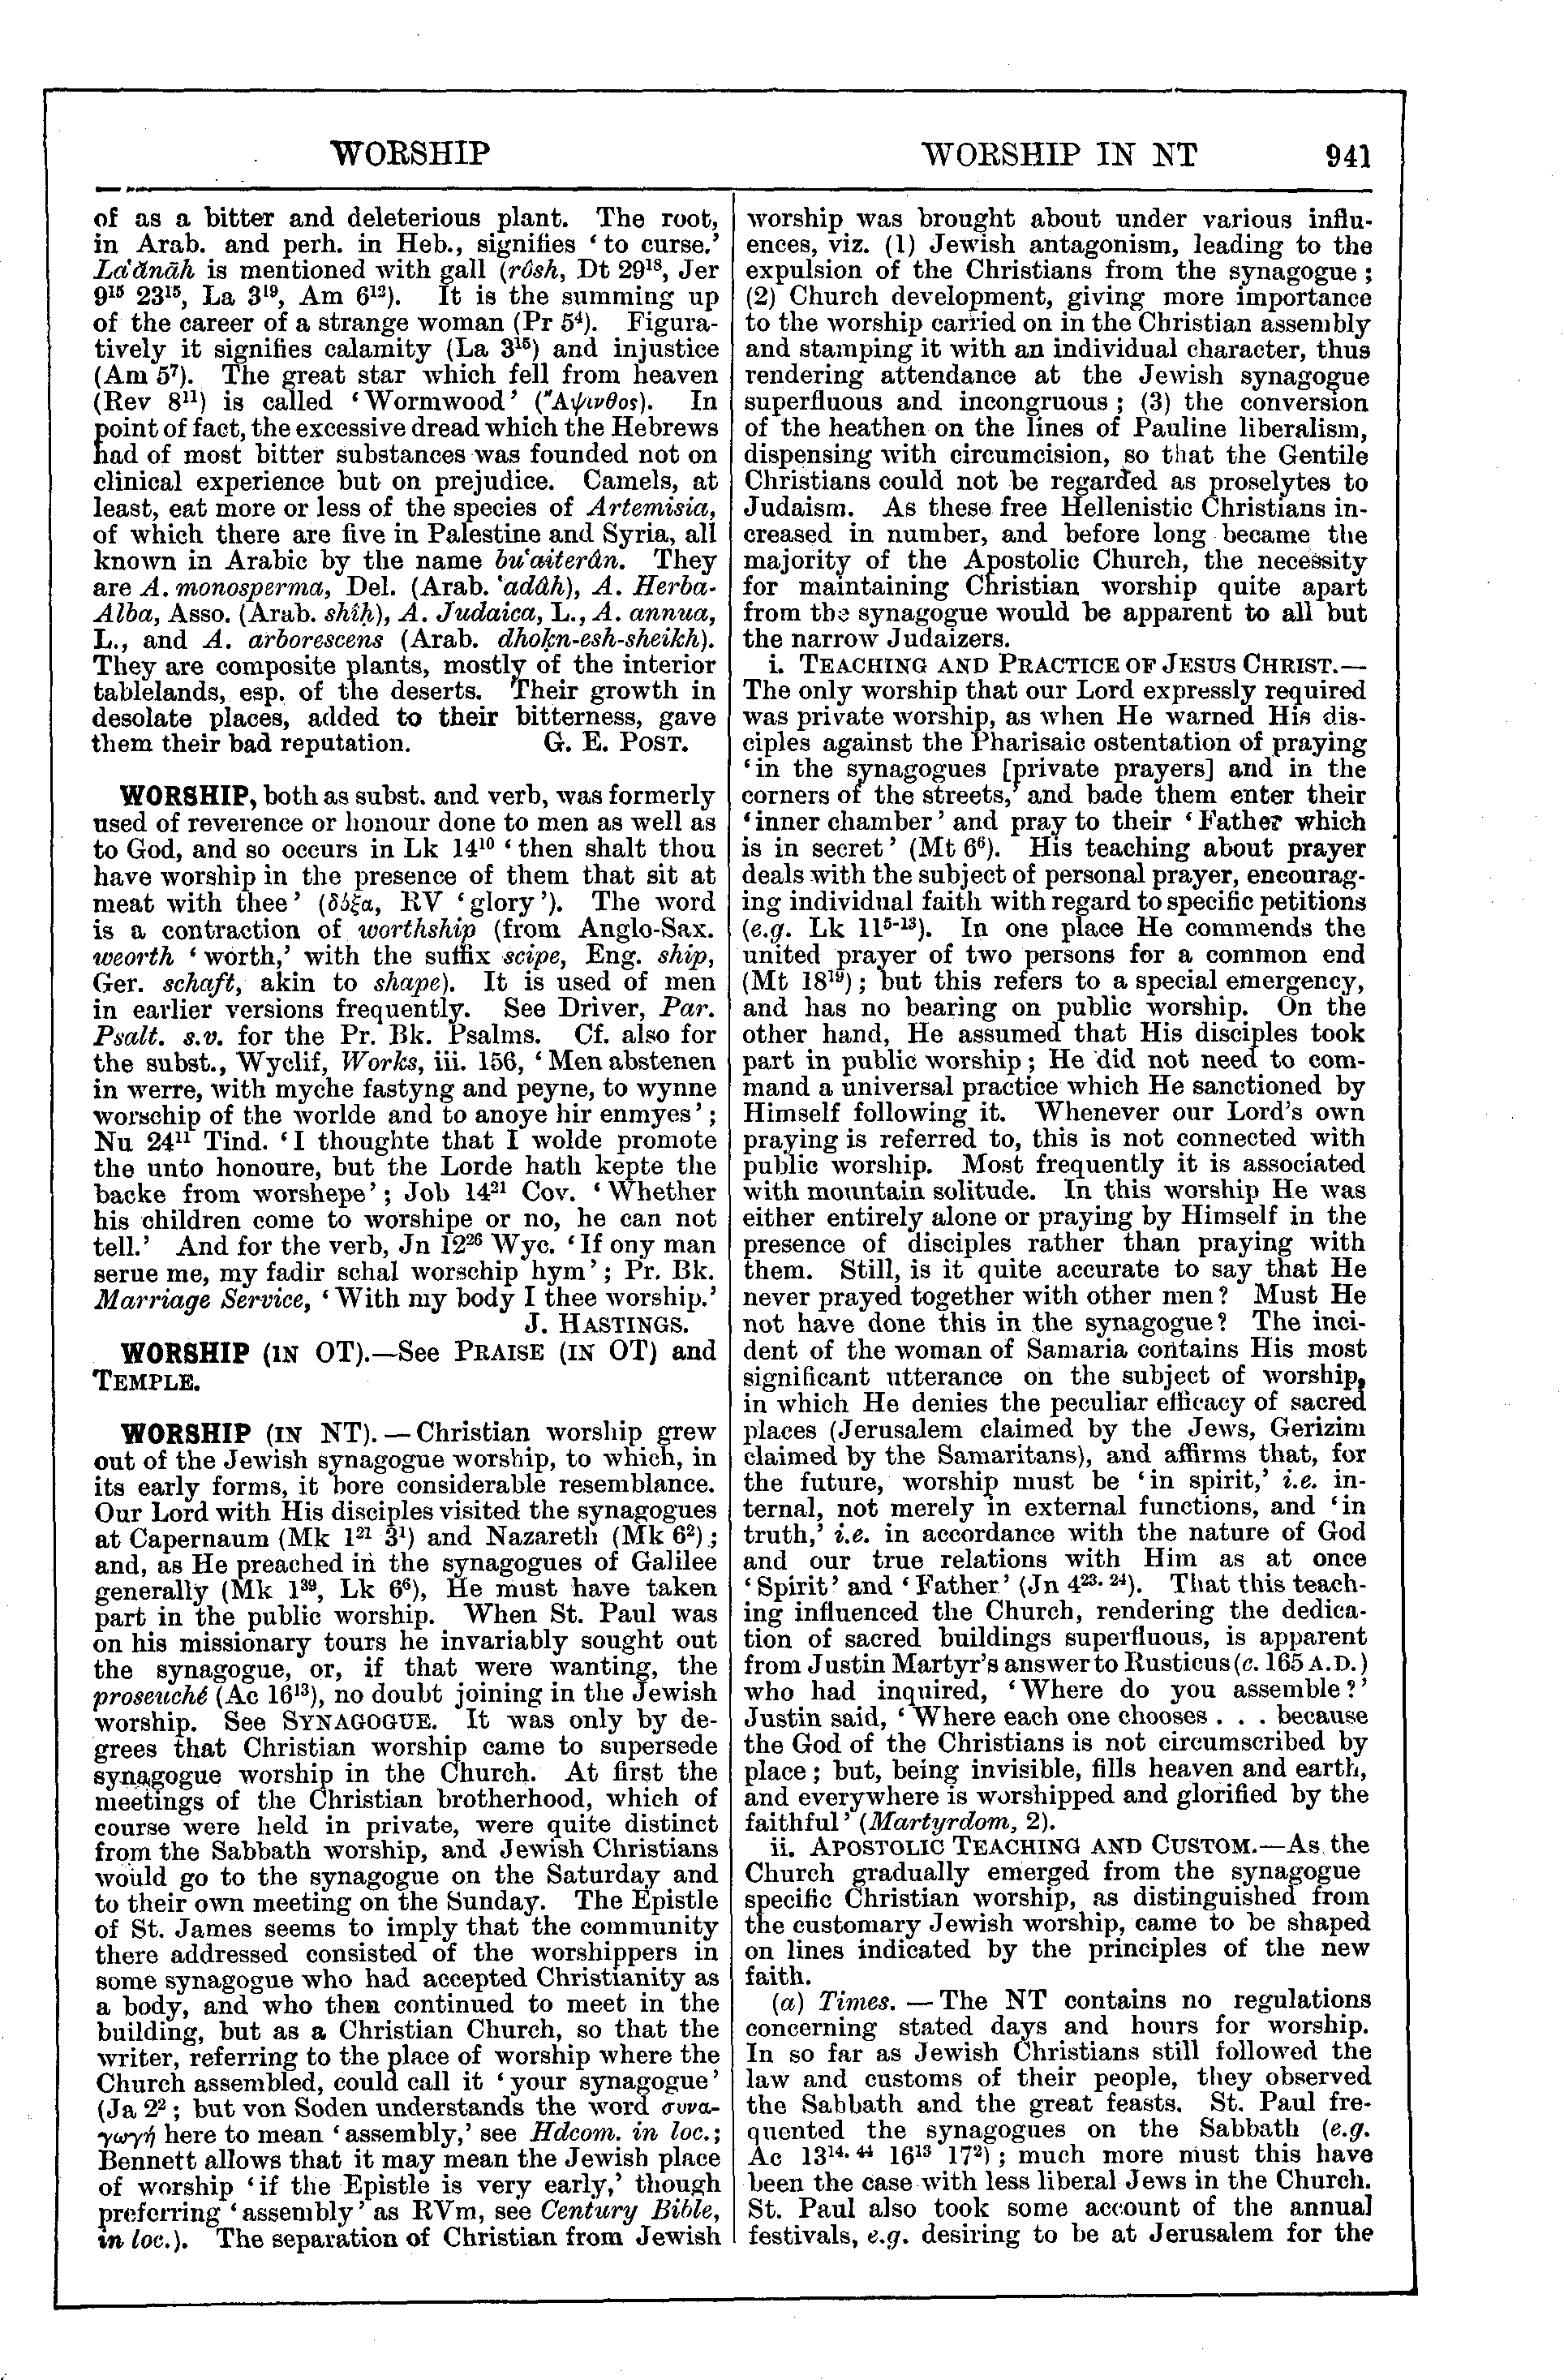 Image of page 941